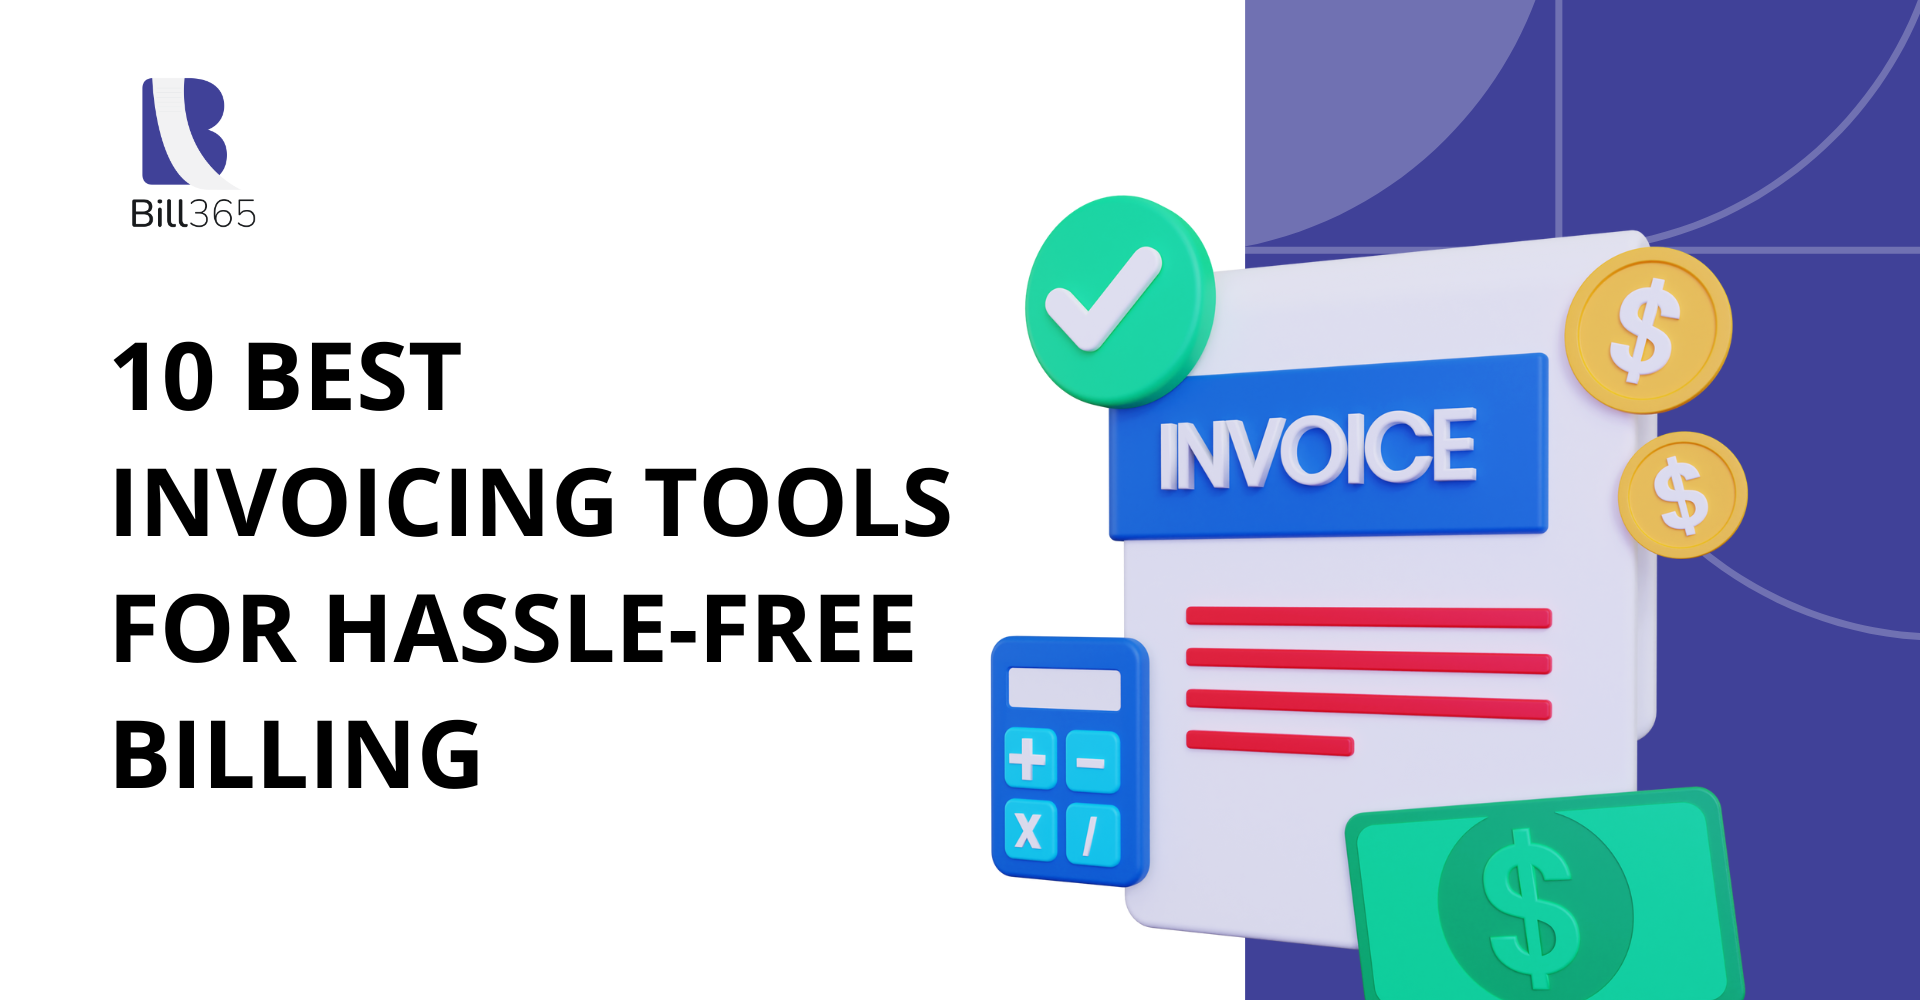 10 Best Invoicing Tools for Hassle-Free Billing